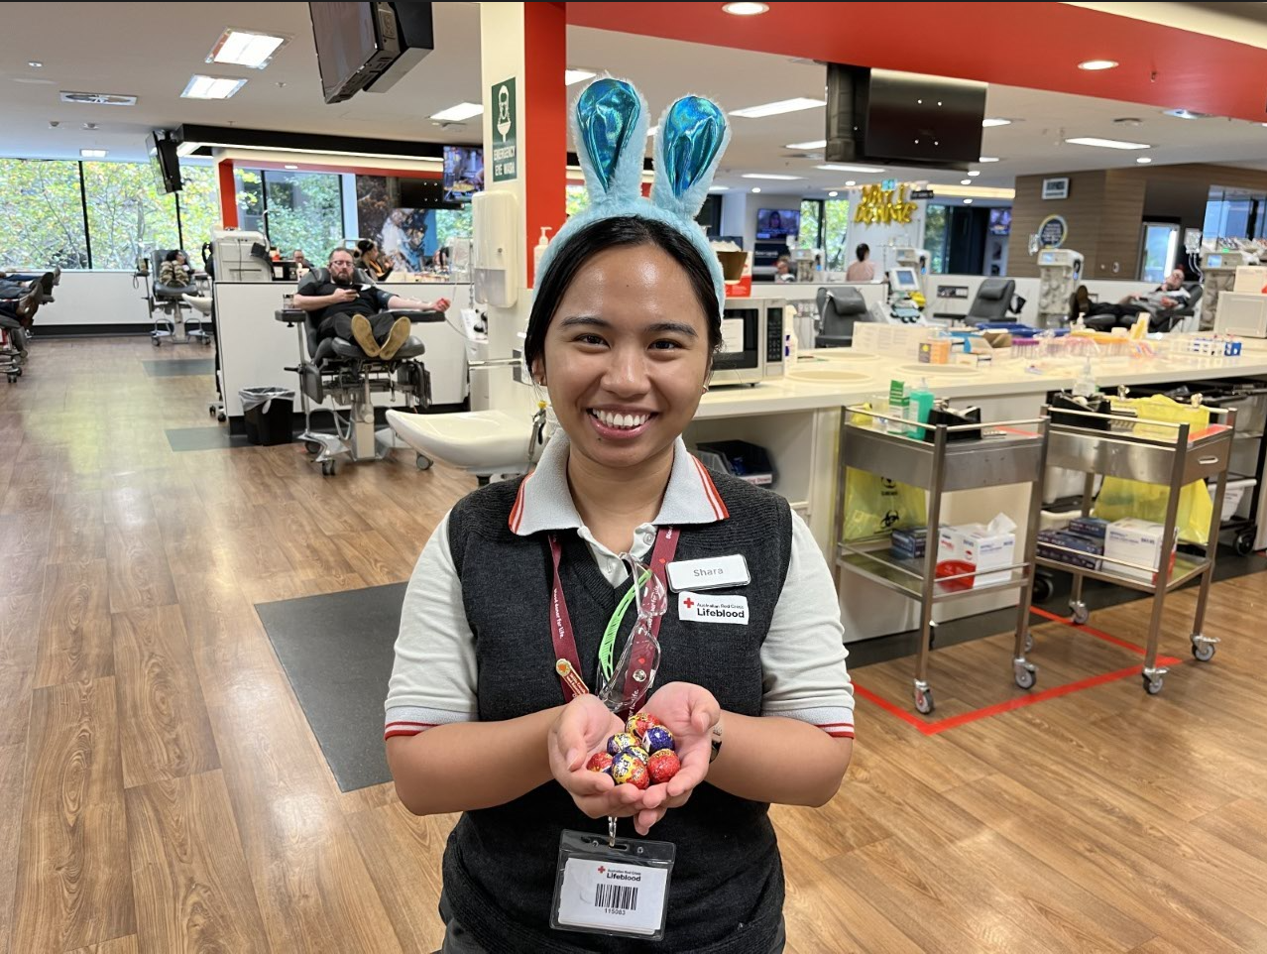 Donor centre staff member wearing bunny ears and holding easter eggs